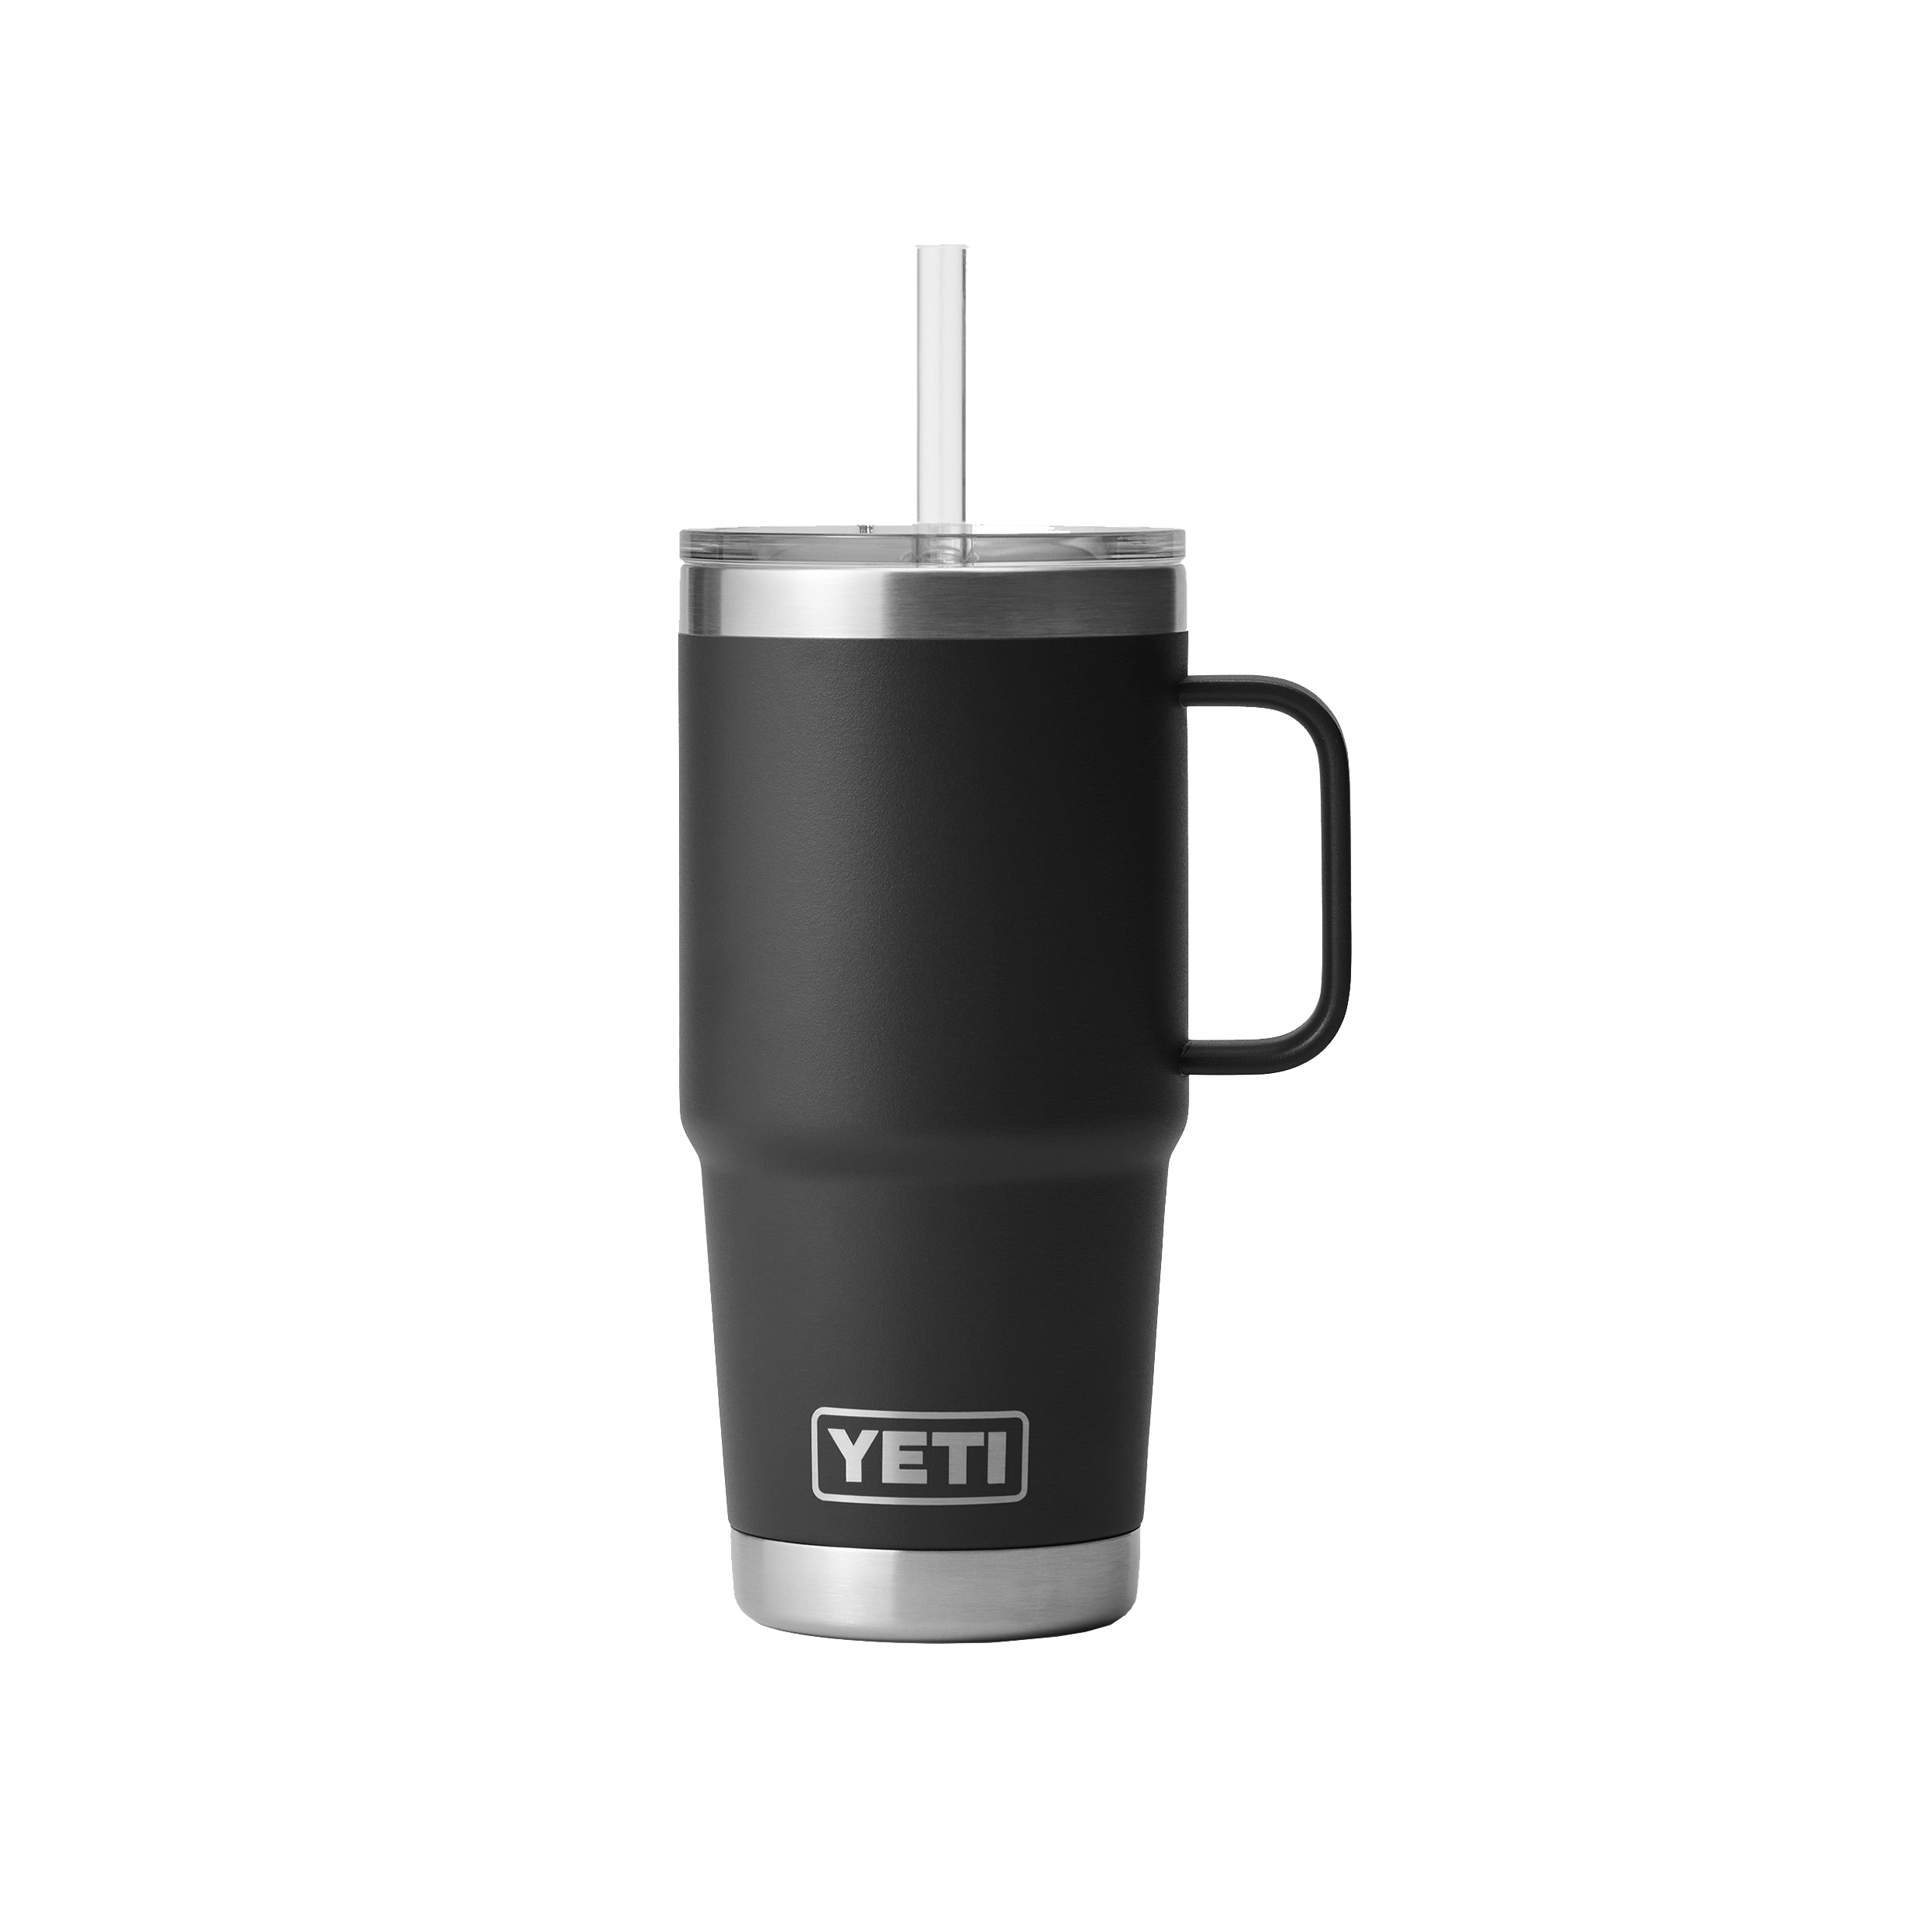 Customizable Handle for Stanley 14oz Tumbler Improved Grip